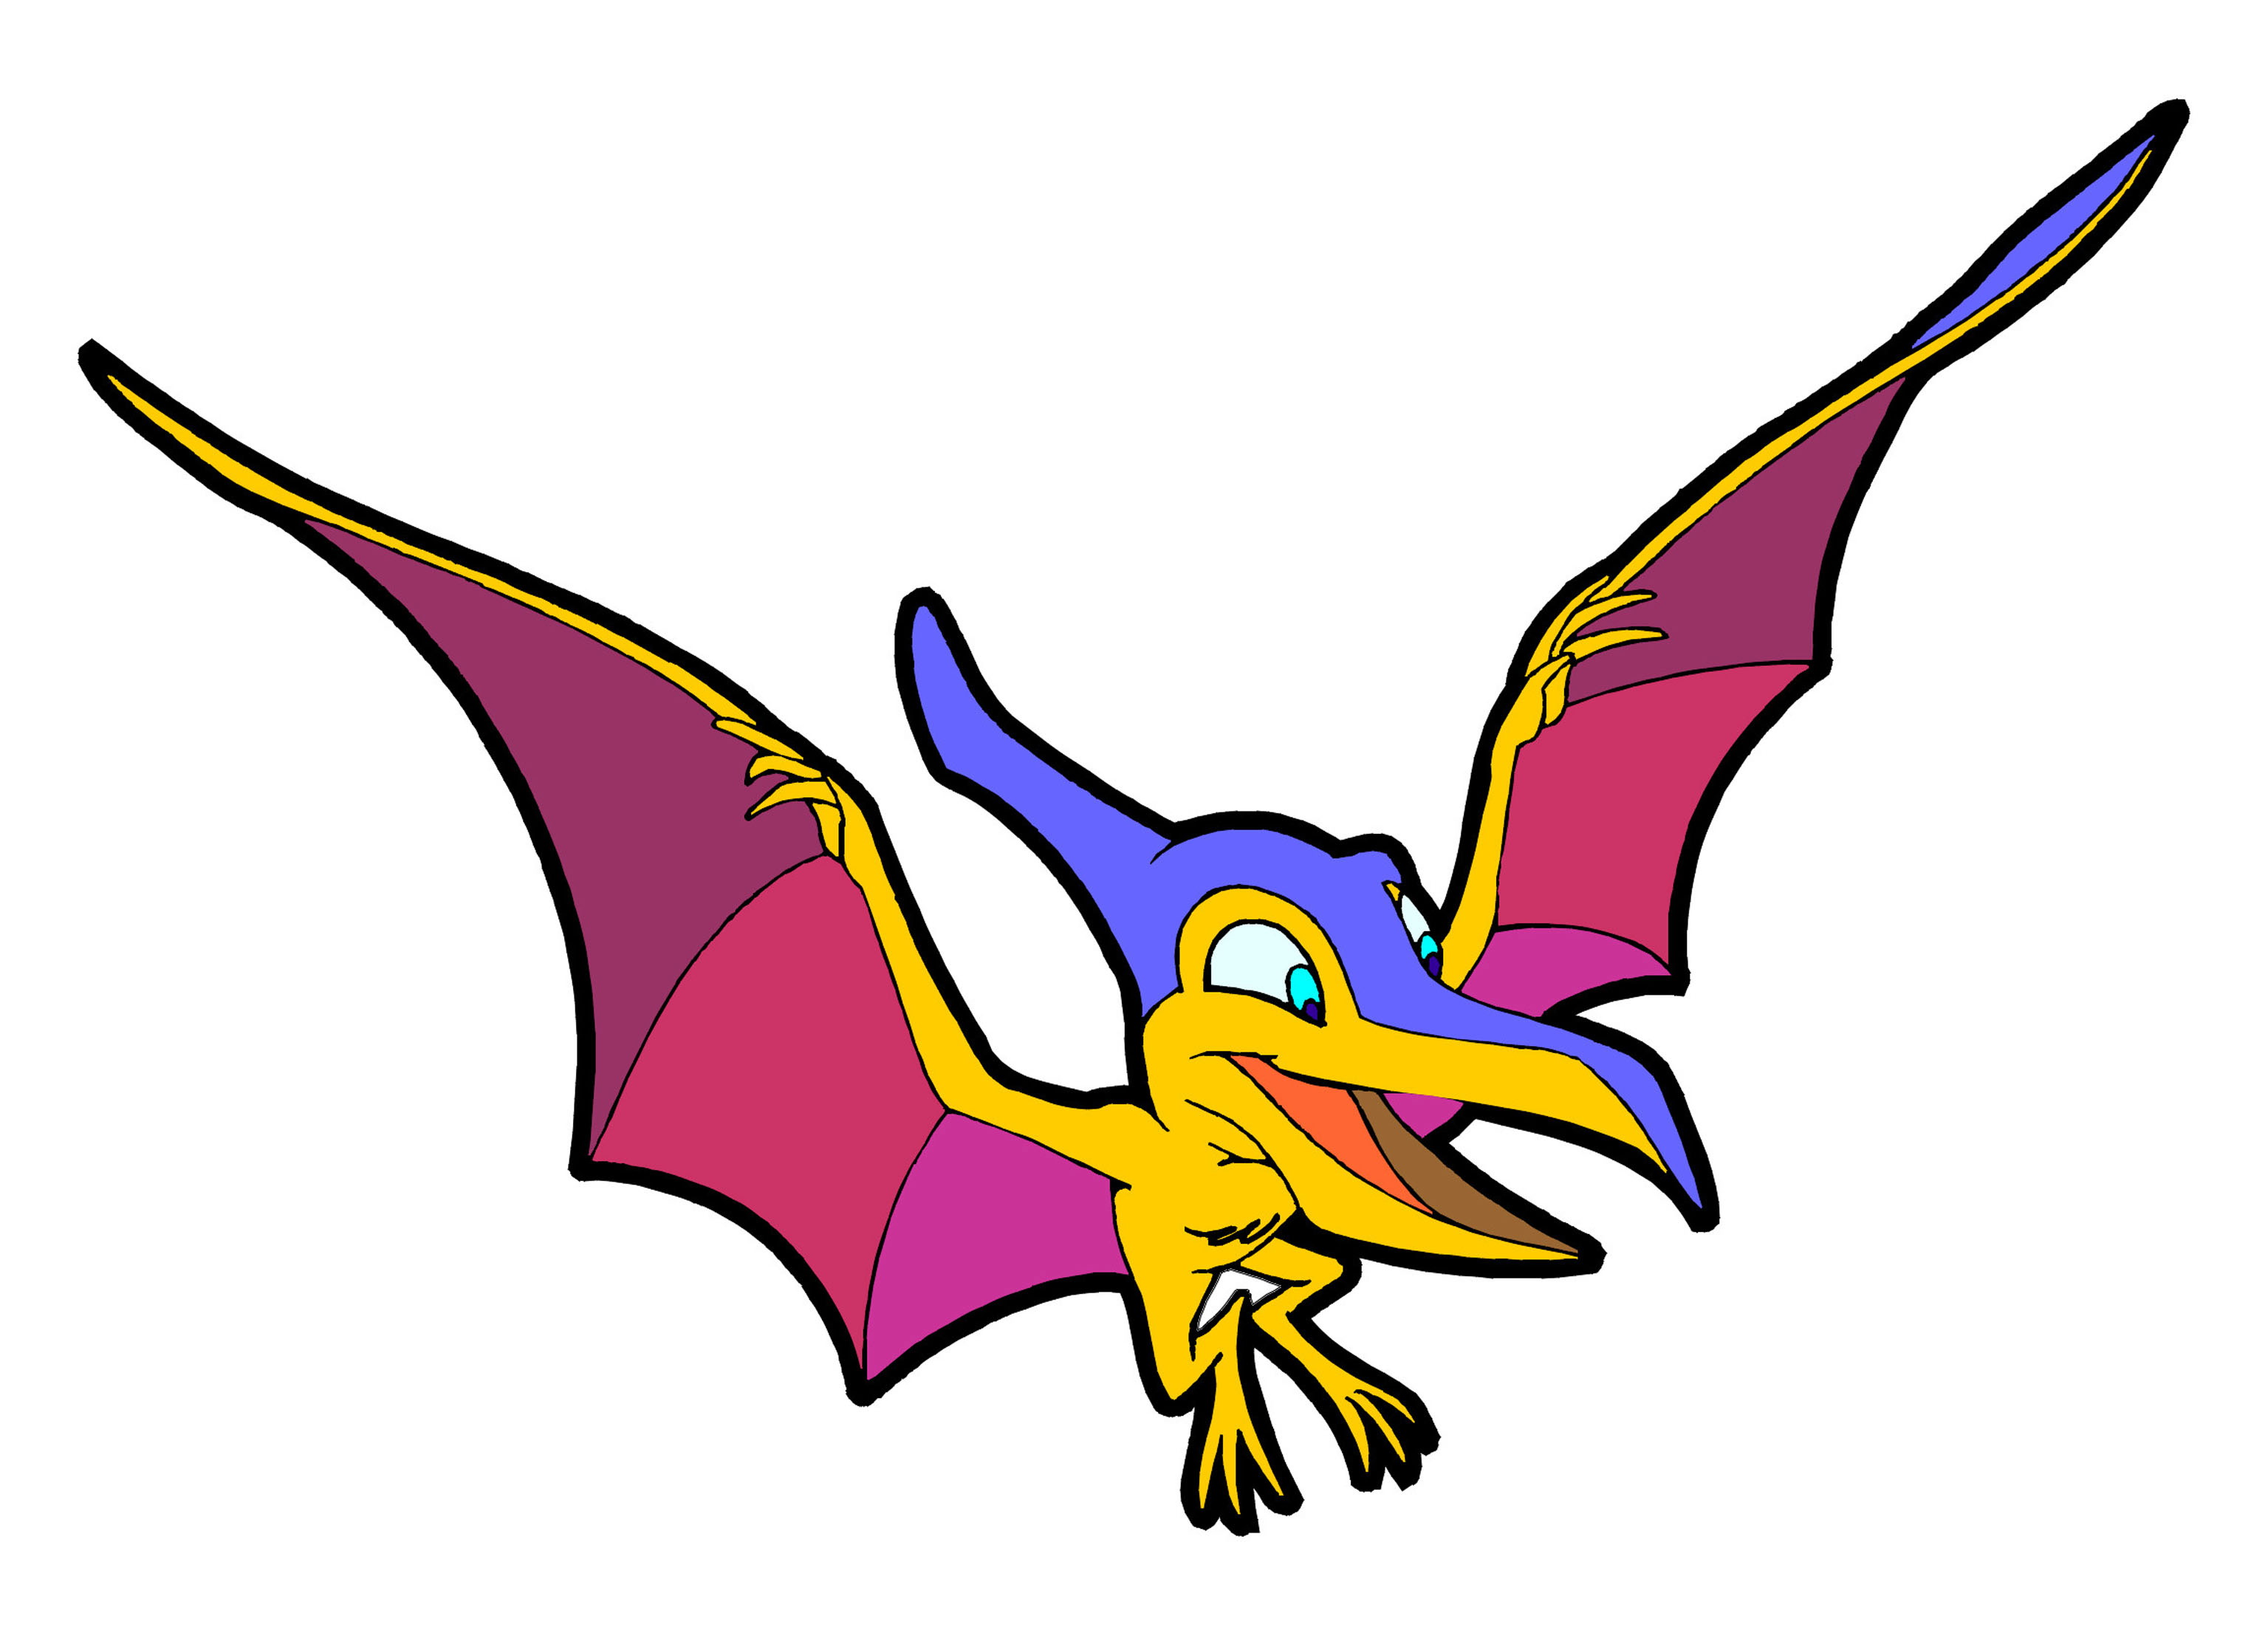 Free Flying Dinosaurs Pictures, Download Free Clip Art, Free